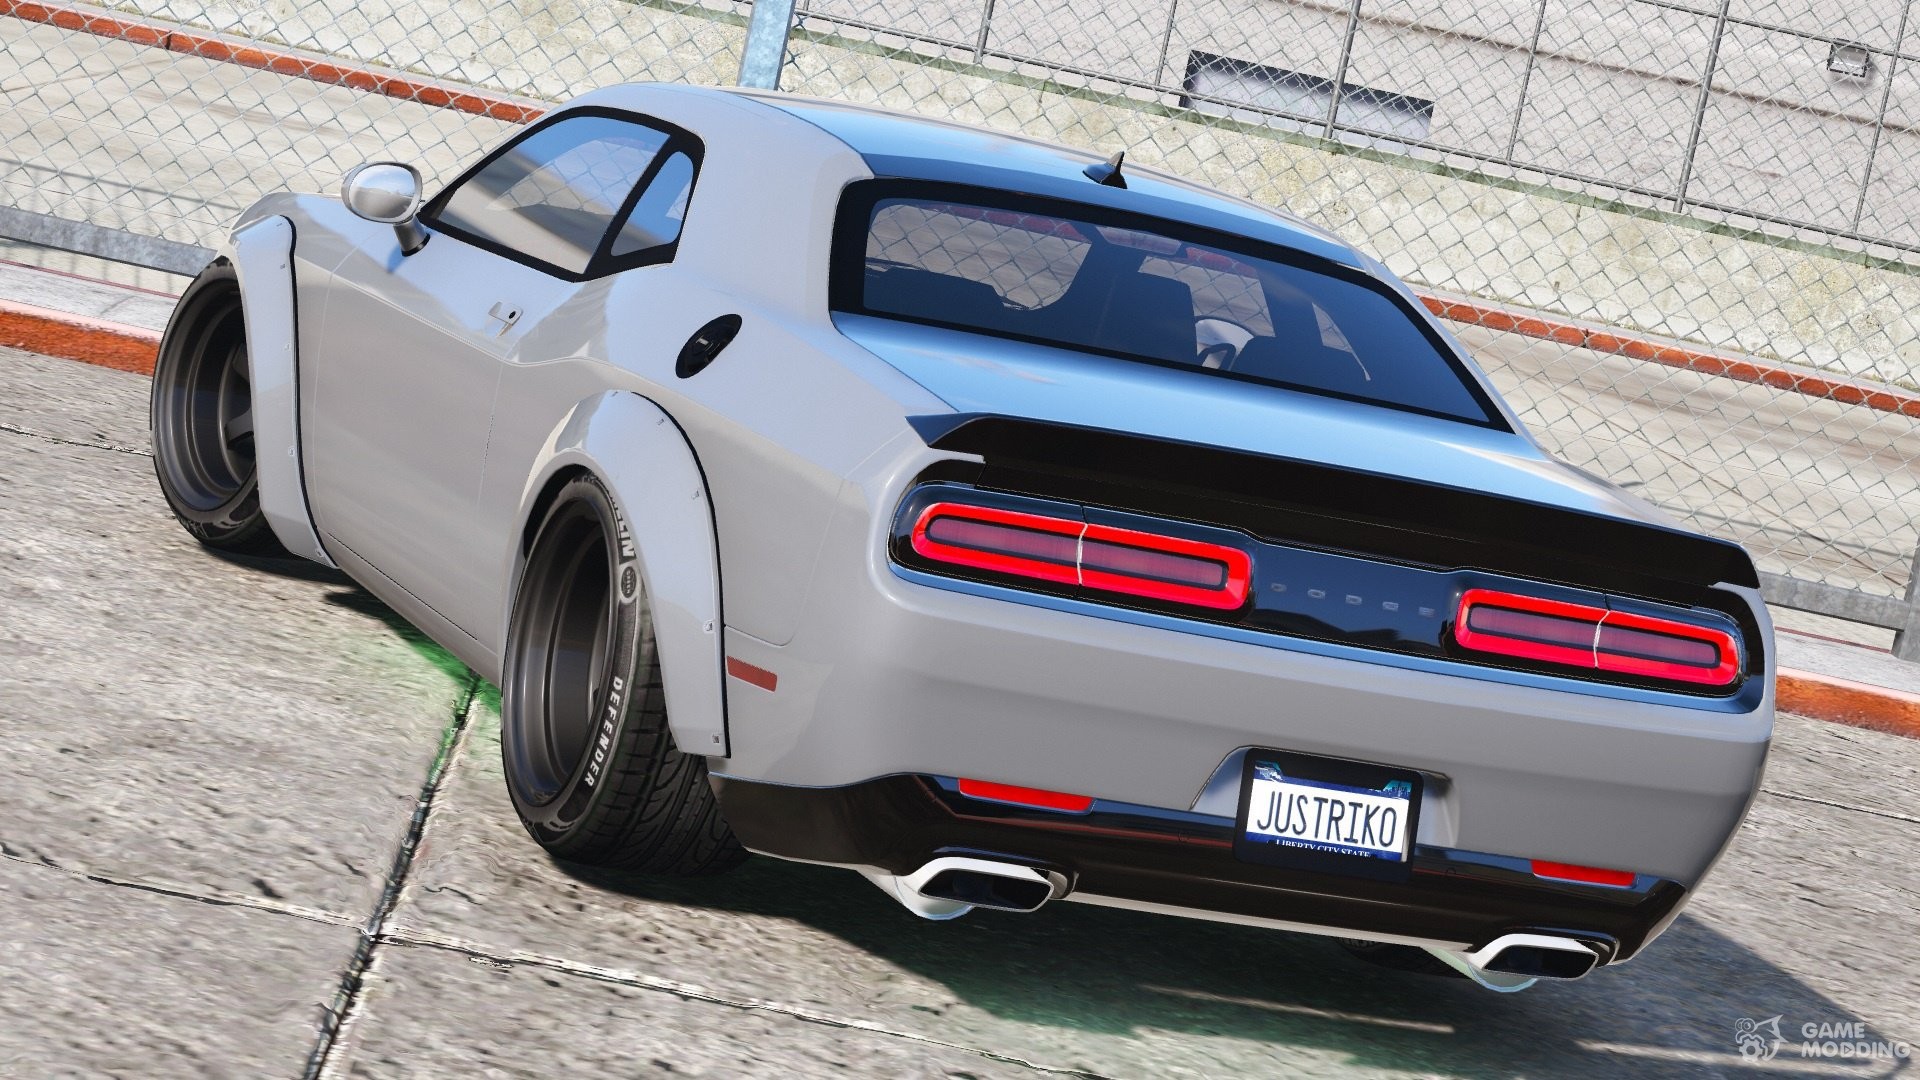 Gta 5 Dodge Challenger Hellcat Dodge Challenger Hellcat Libertywalk-The Fate of the Furious Edition for GTA 5